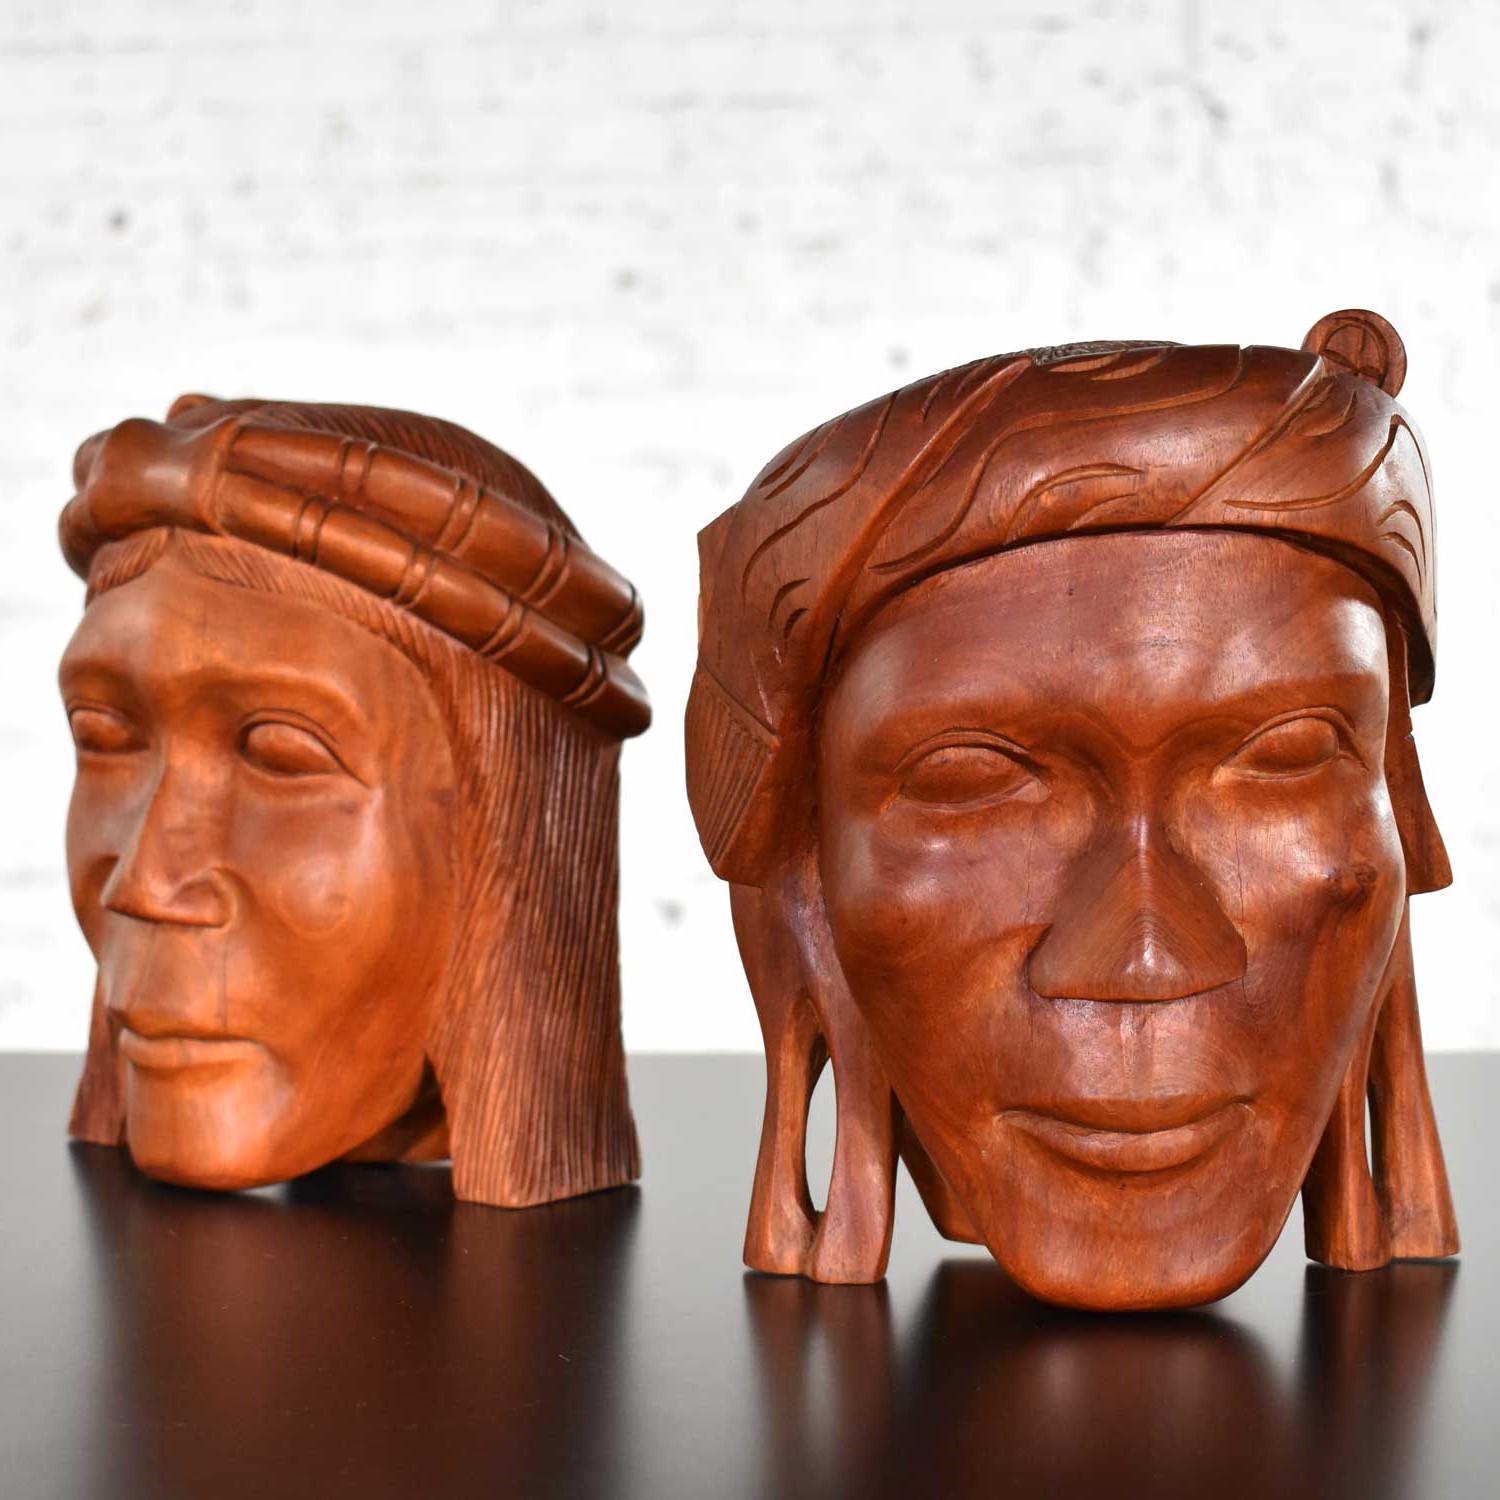 Handsome pair of tribal figural carved wood head bookends. They are in awesome vintage condition. Please see photos, circa mid-20th century.

If you are looking for unique bookends to hold your favorite book collection…look no further. This